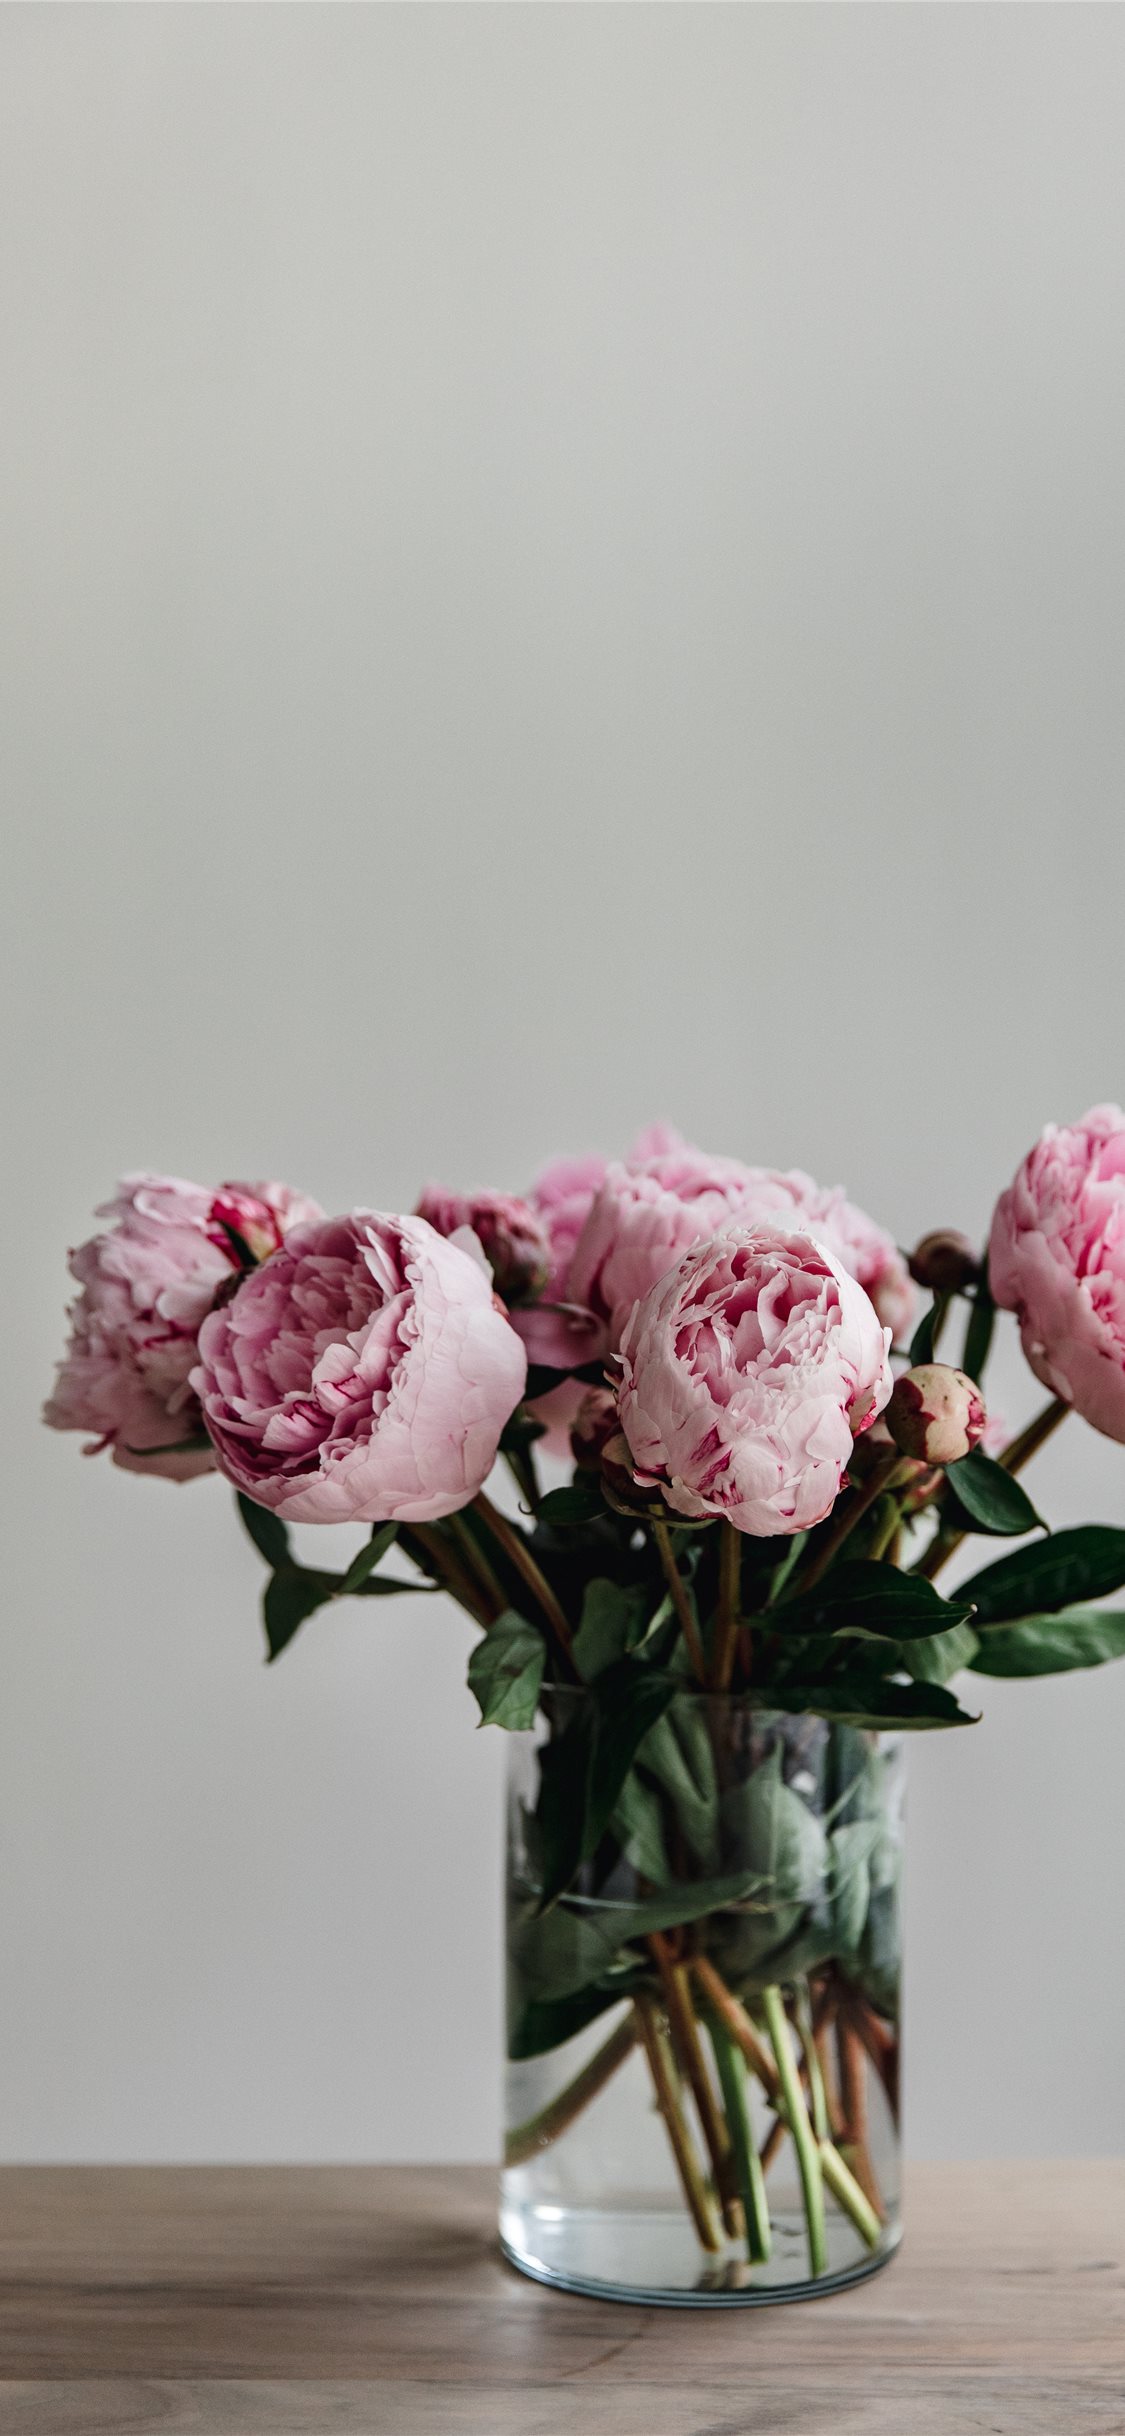 This Simple Image Of A Bunch Peonies In Vase iPhone X